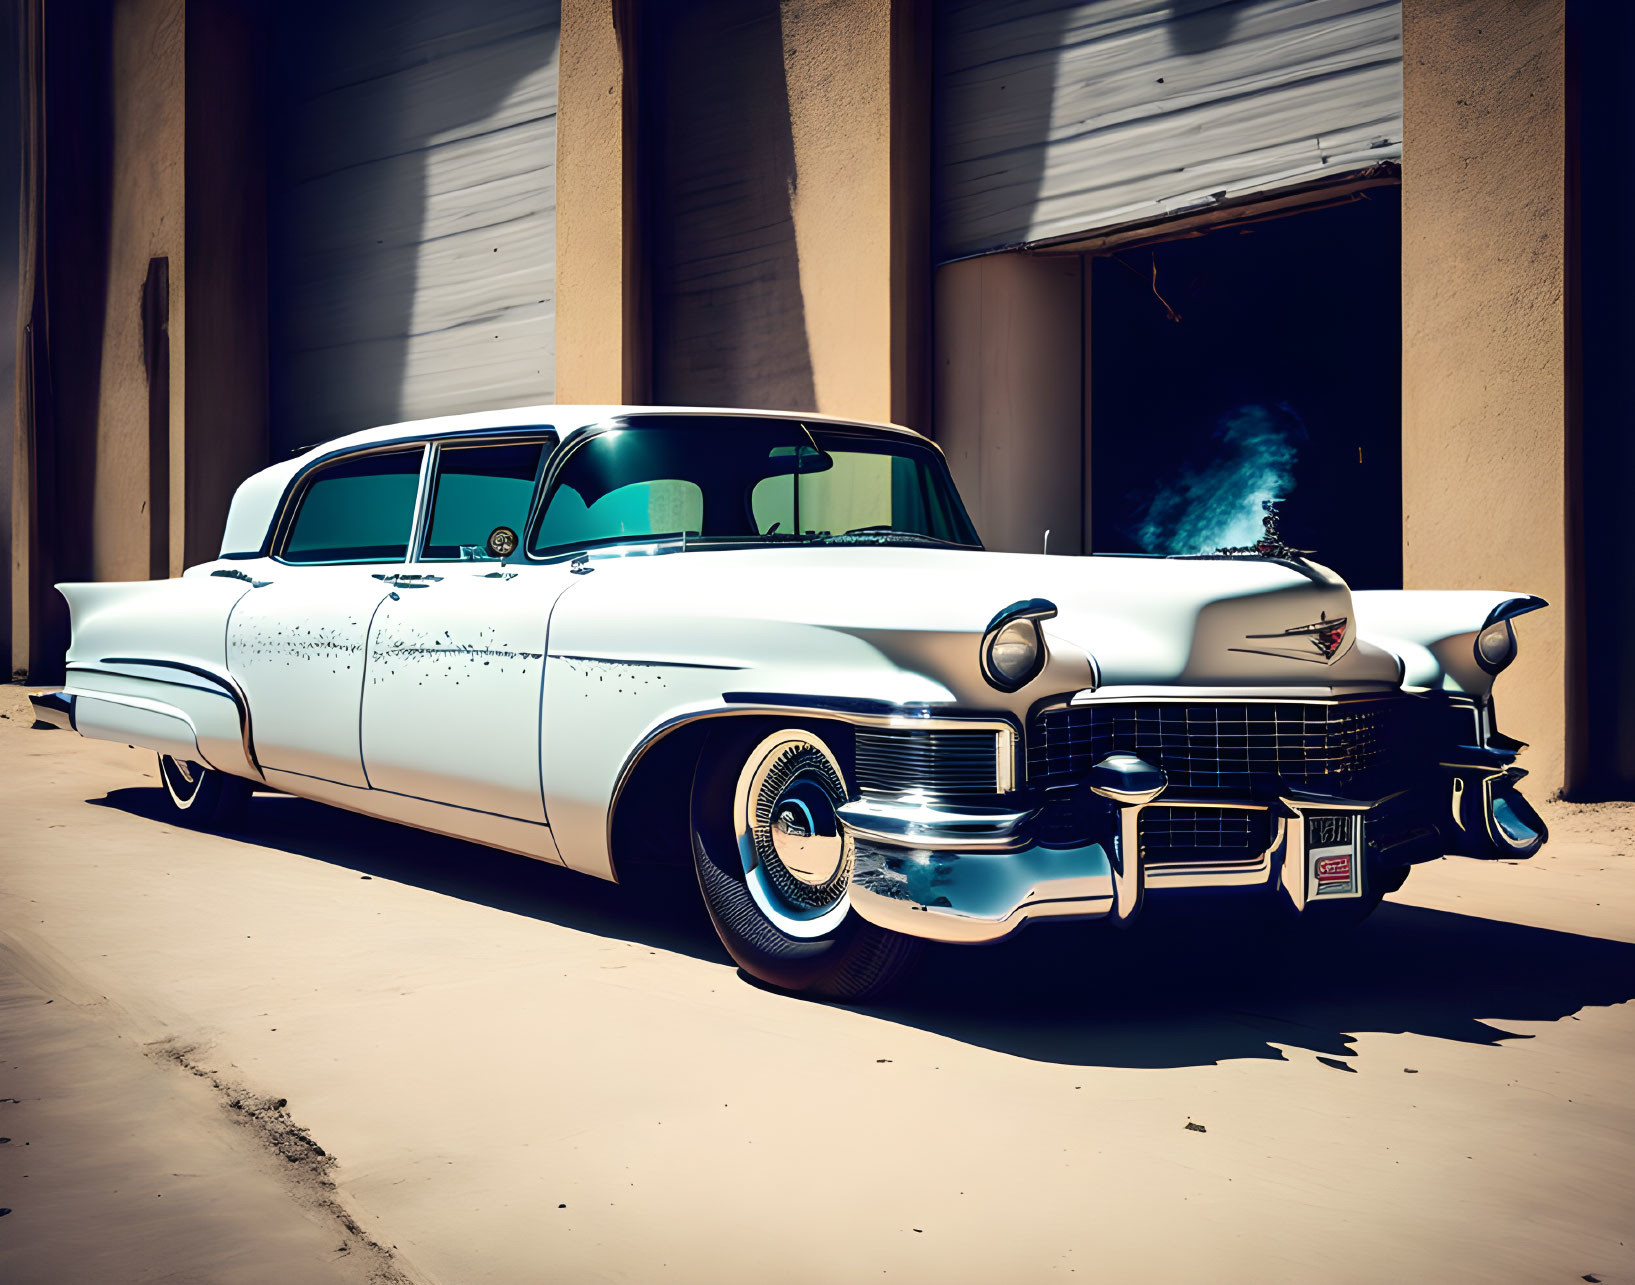 Vintage White Cadillac Parked with Sunlight and Blue Smoke